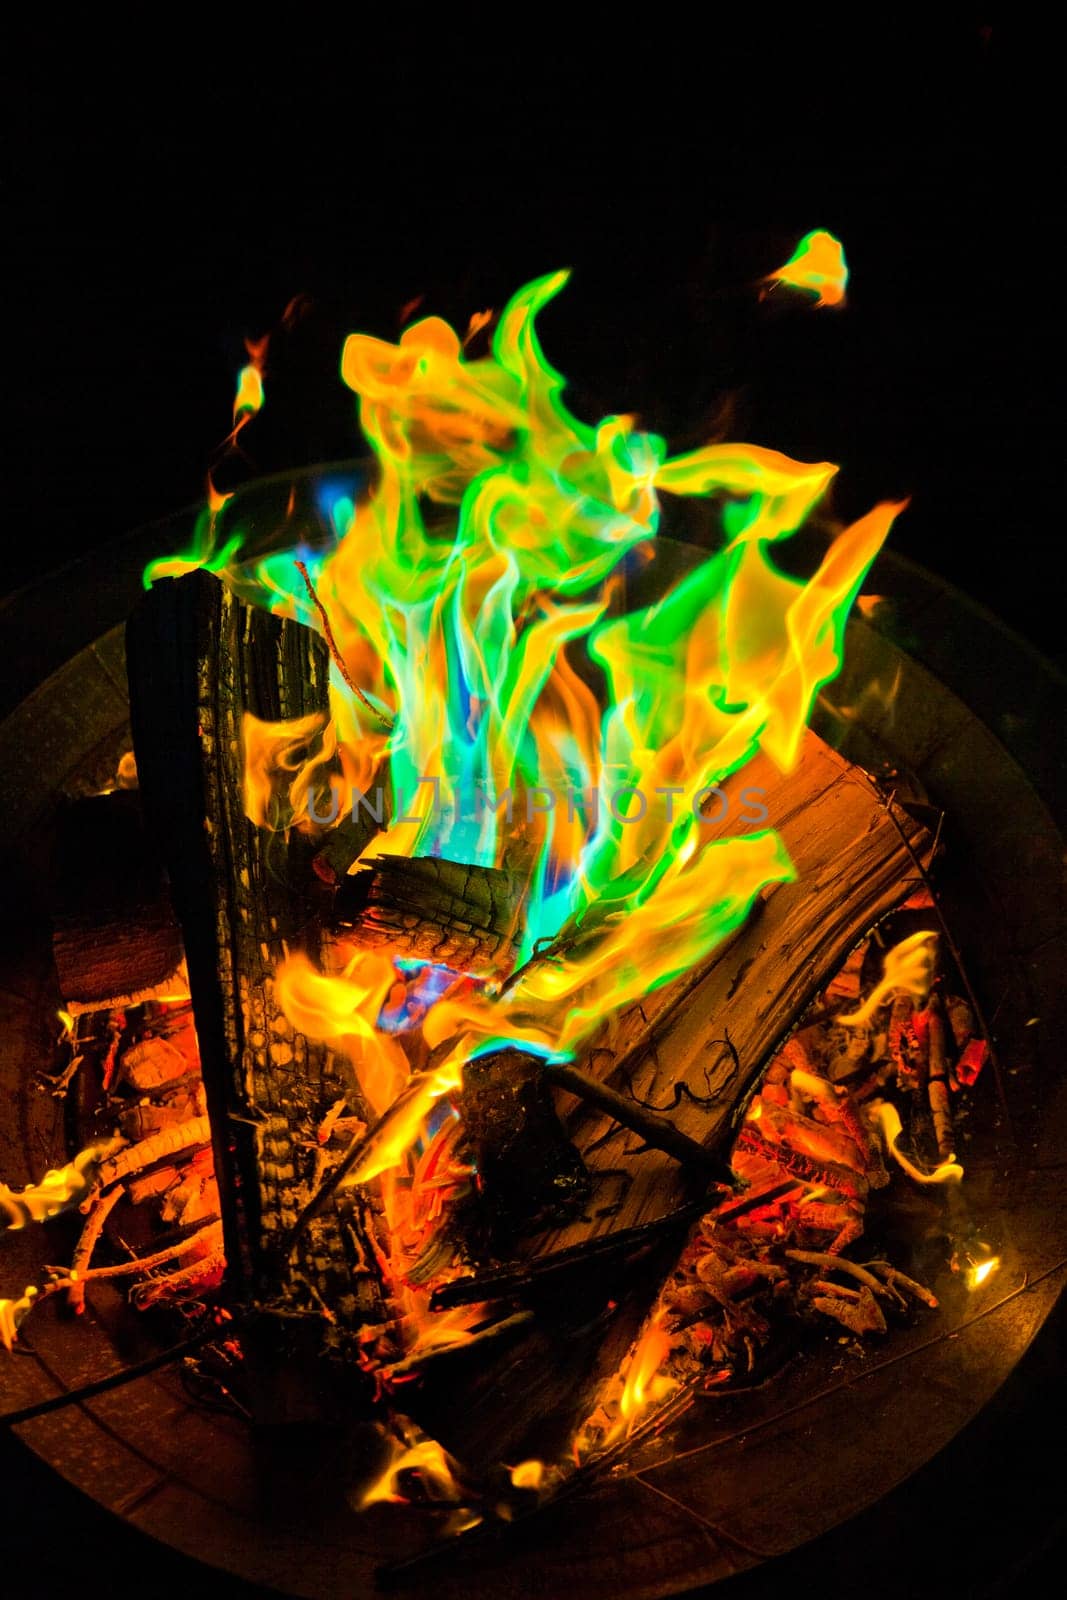 Multi-Colored Flames Dancing in Metal Fire Pit at Night by njproductions